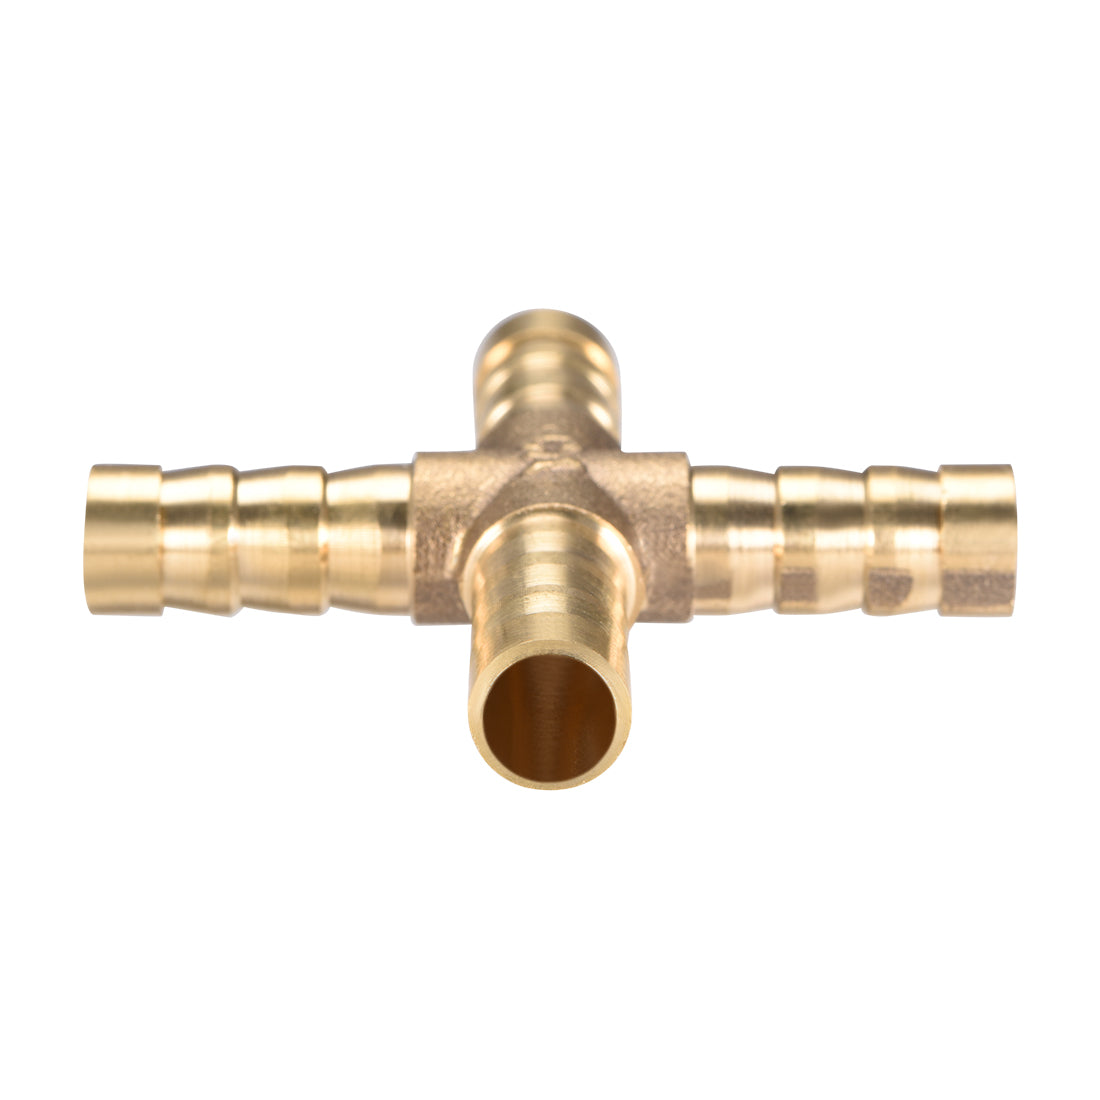 Uxcell Uxcell 8mm or 5/16" ID Brass Barb Splicer Fitting 4 Ways Brass Cross Barb Fitting